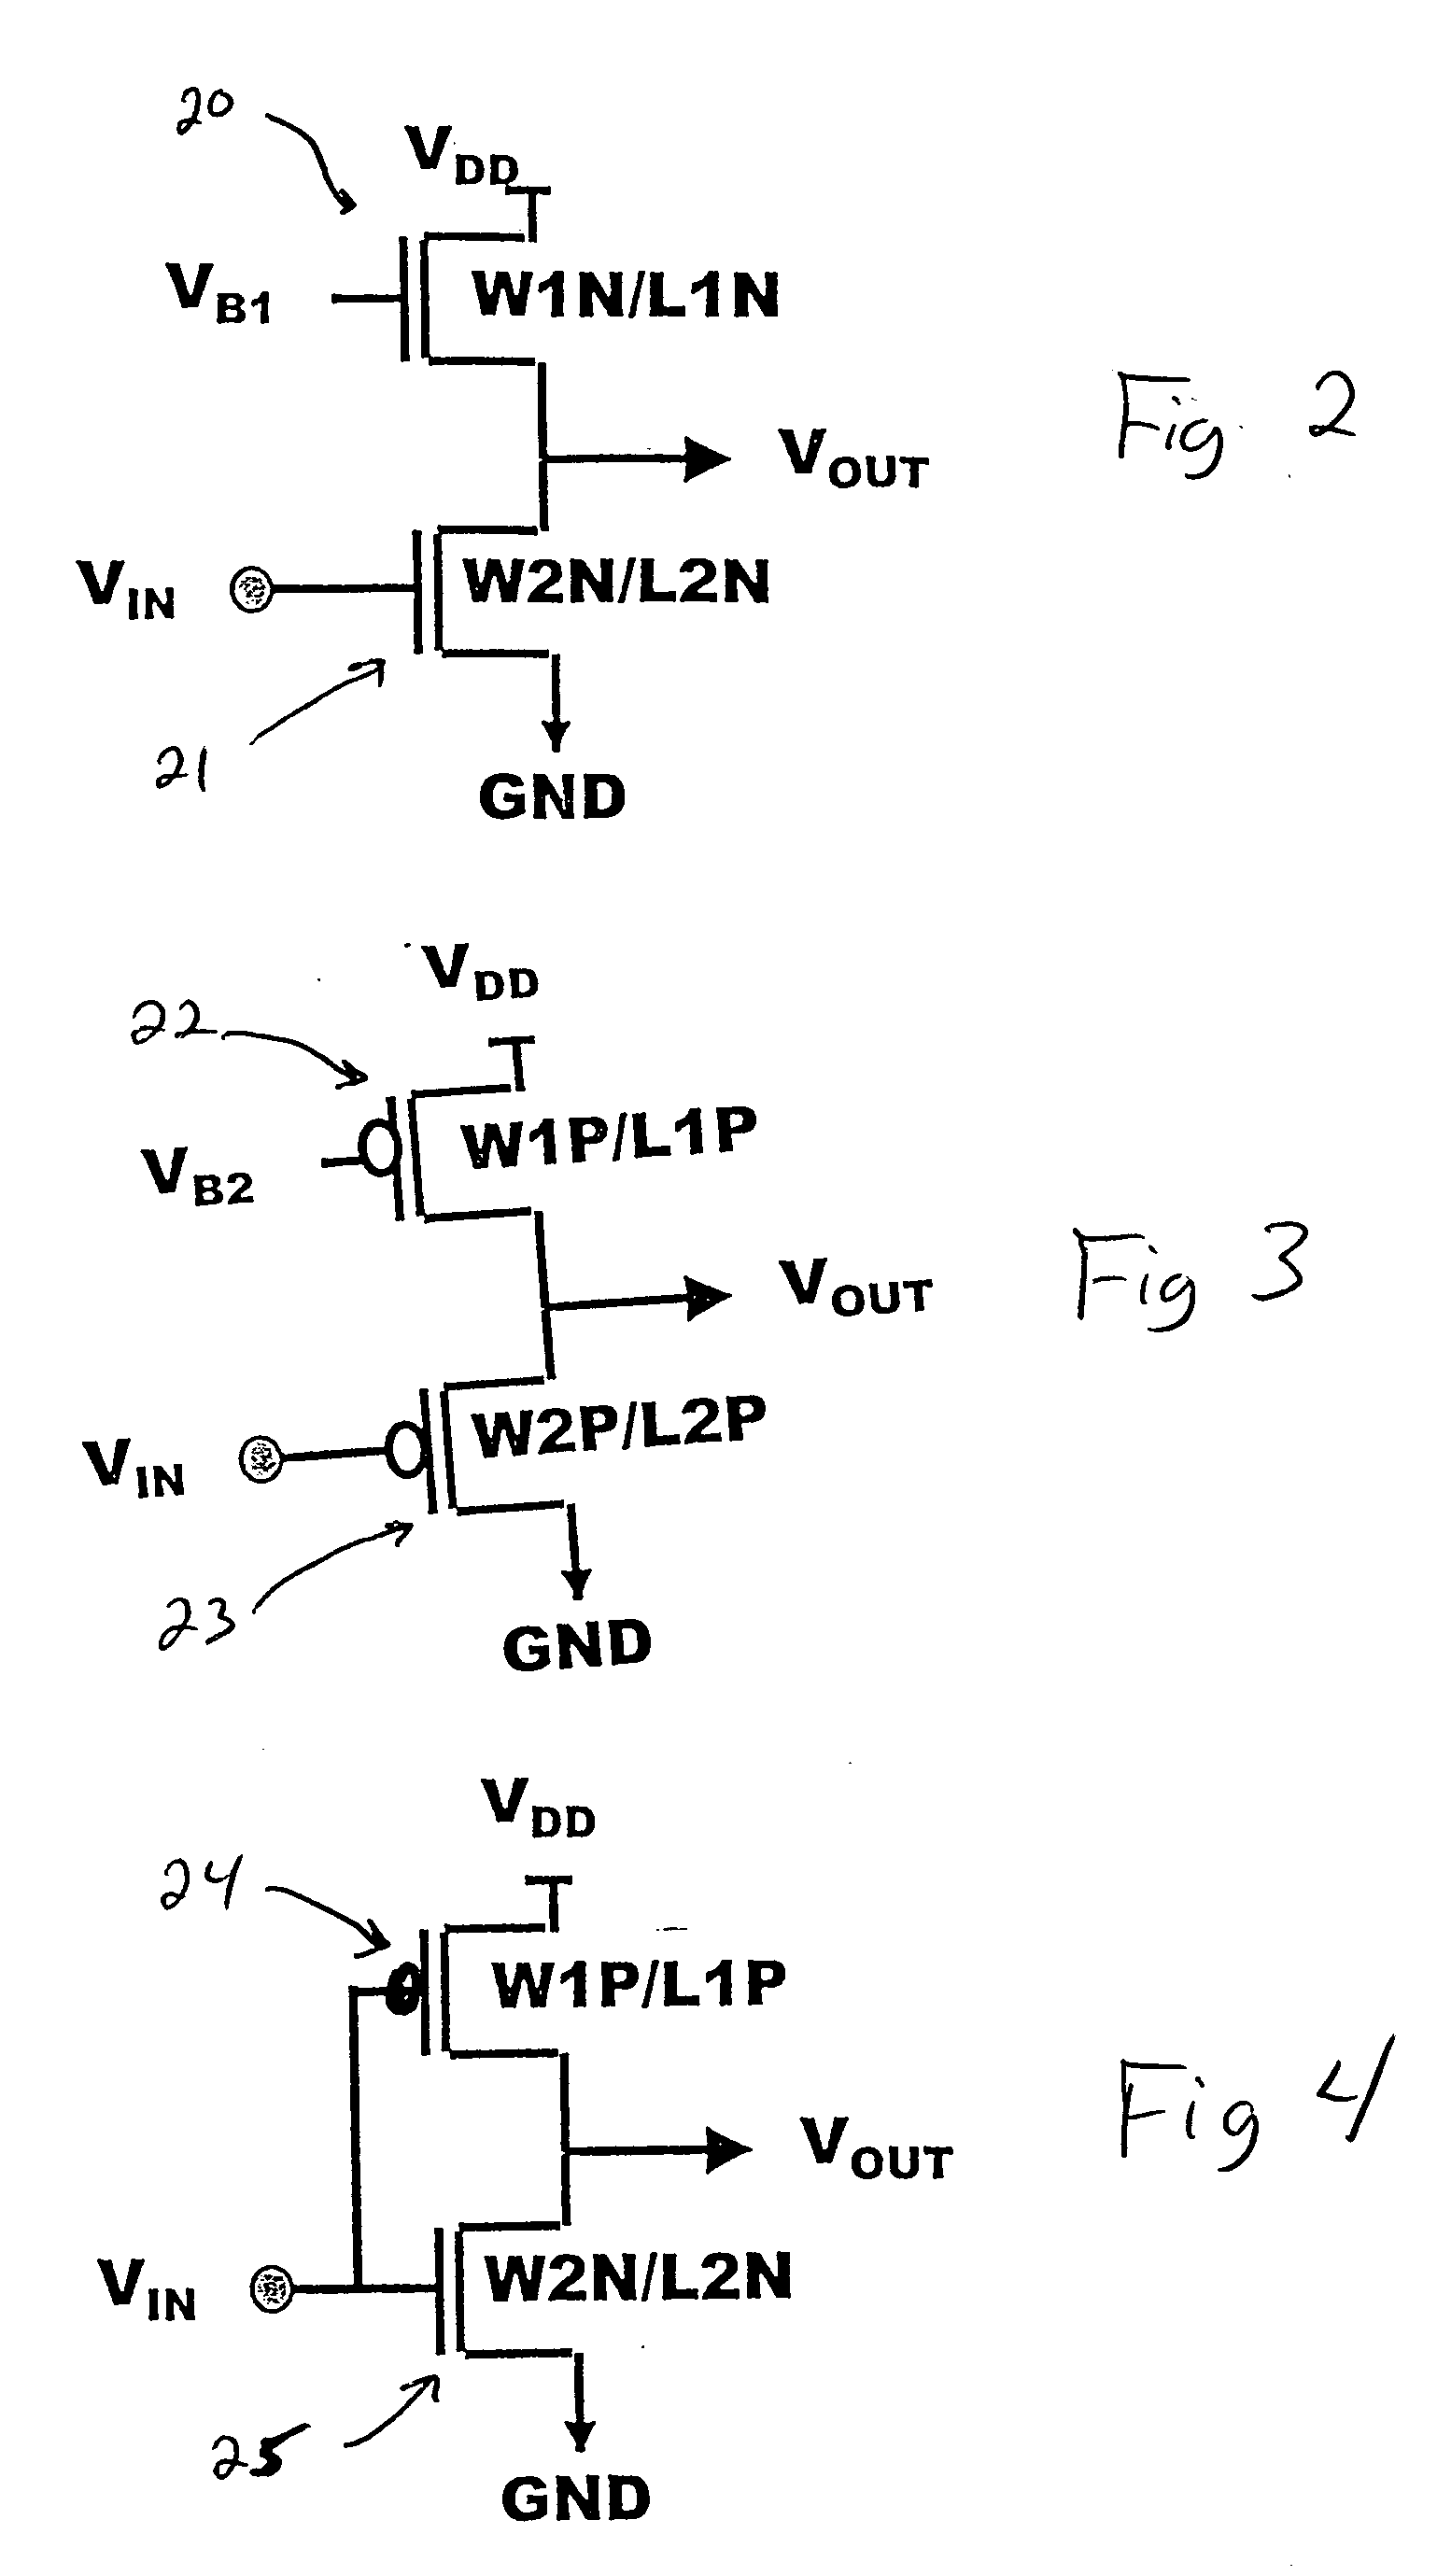 Circuits and methods for characterizing random variations in device characteristics in semiconductor integrated circuits